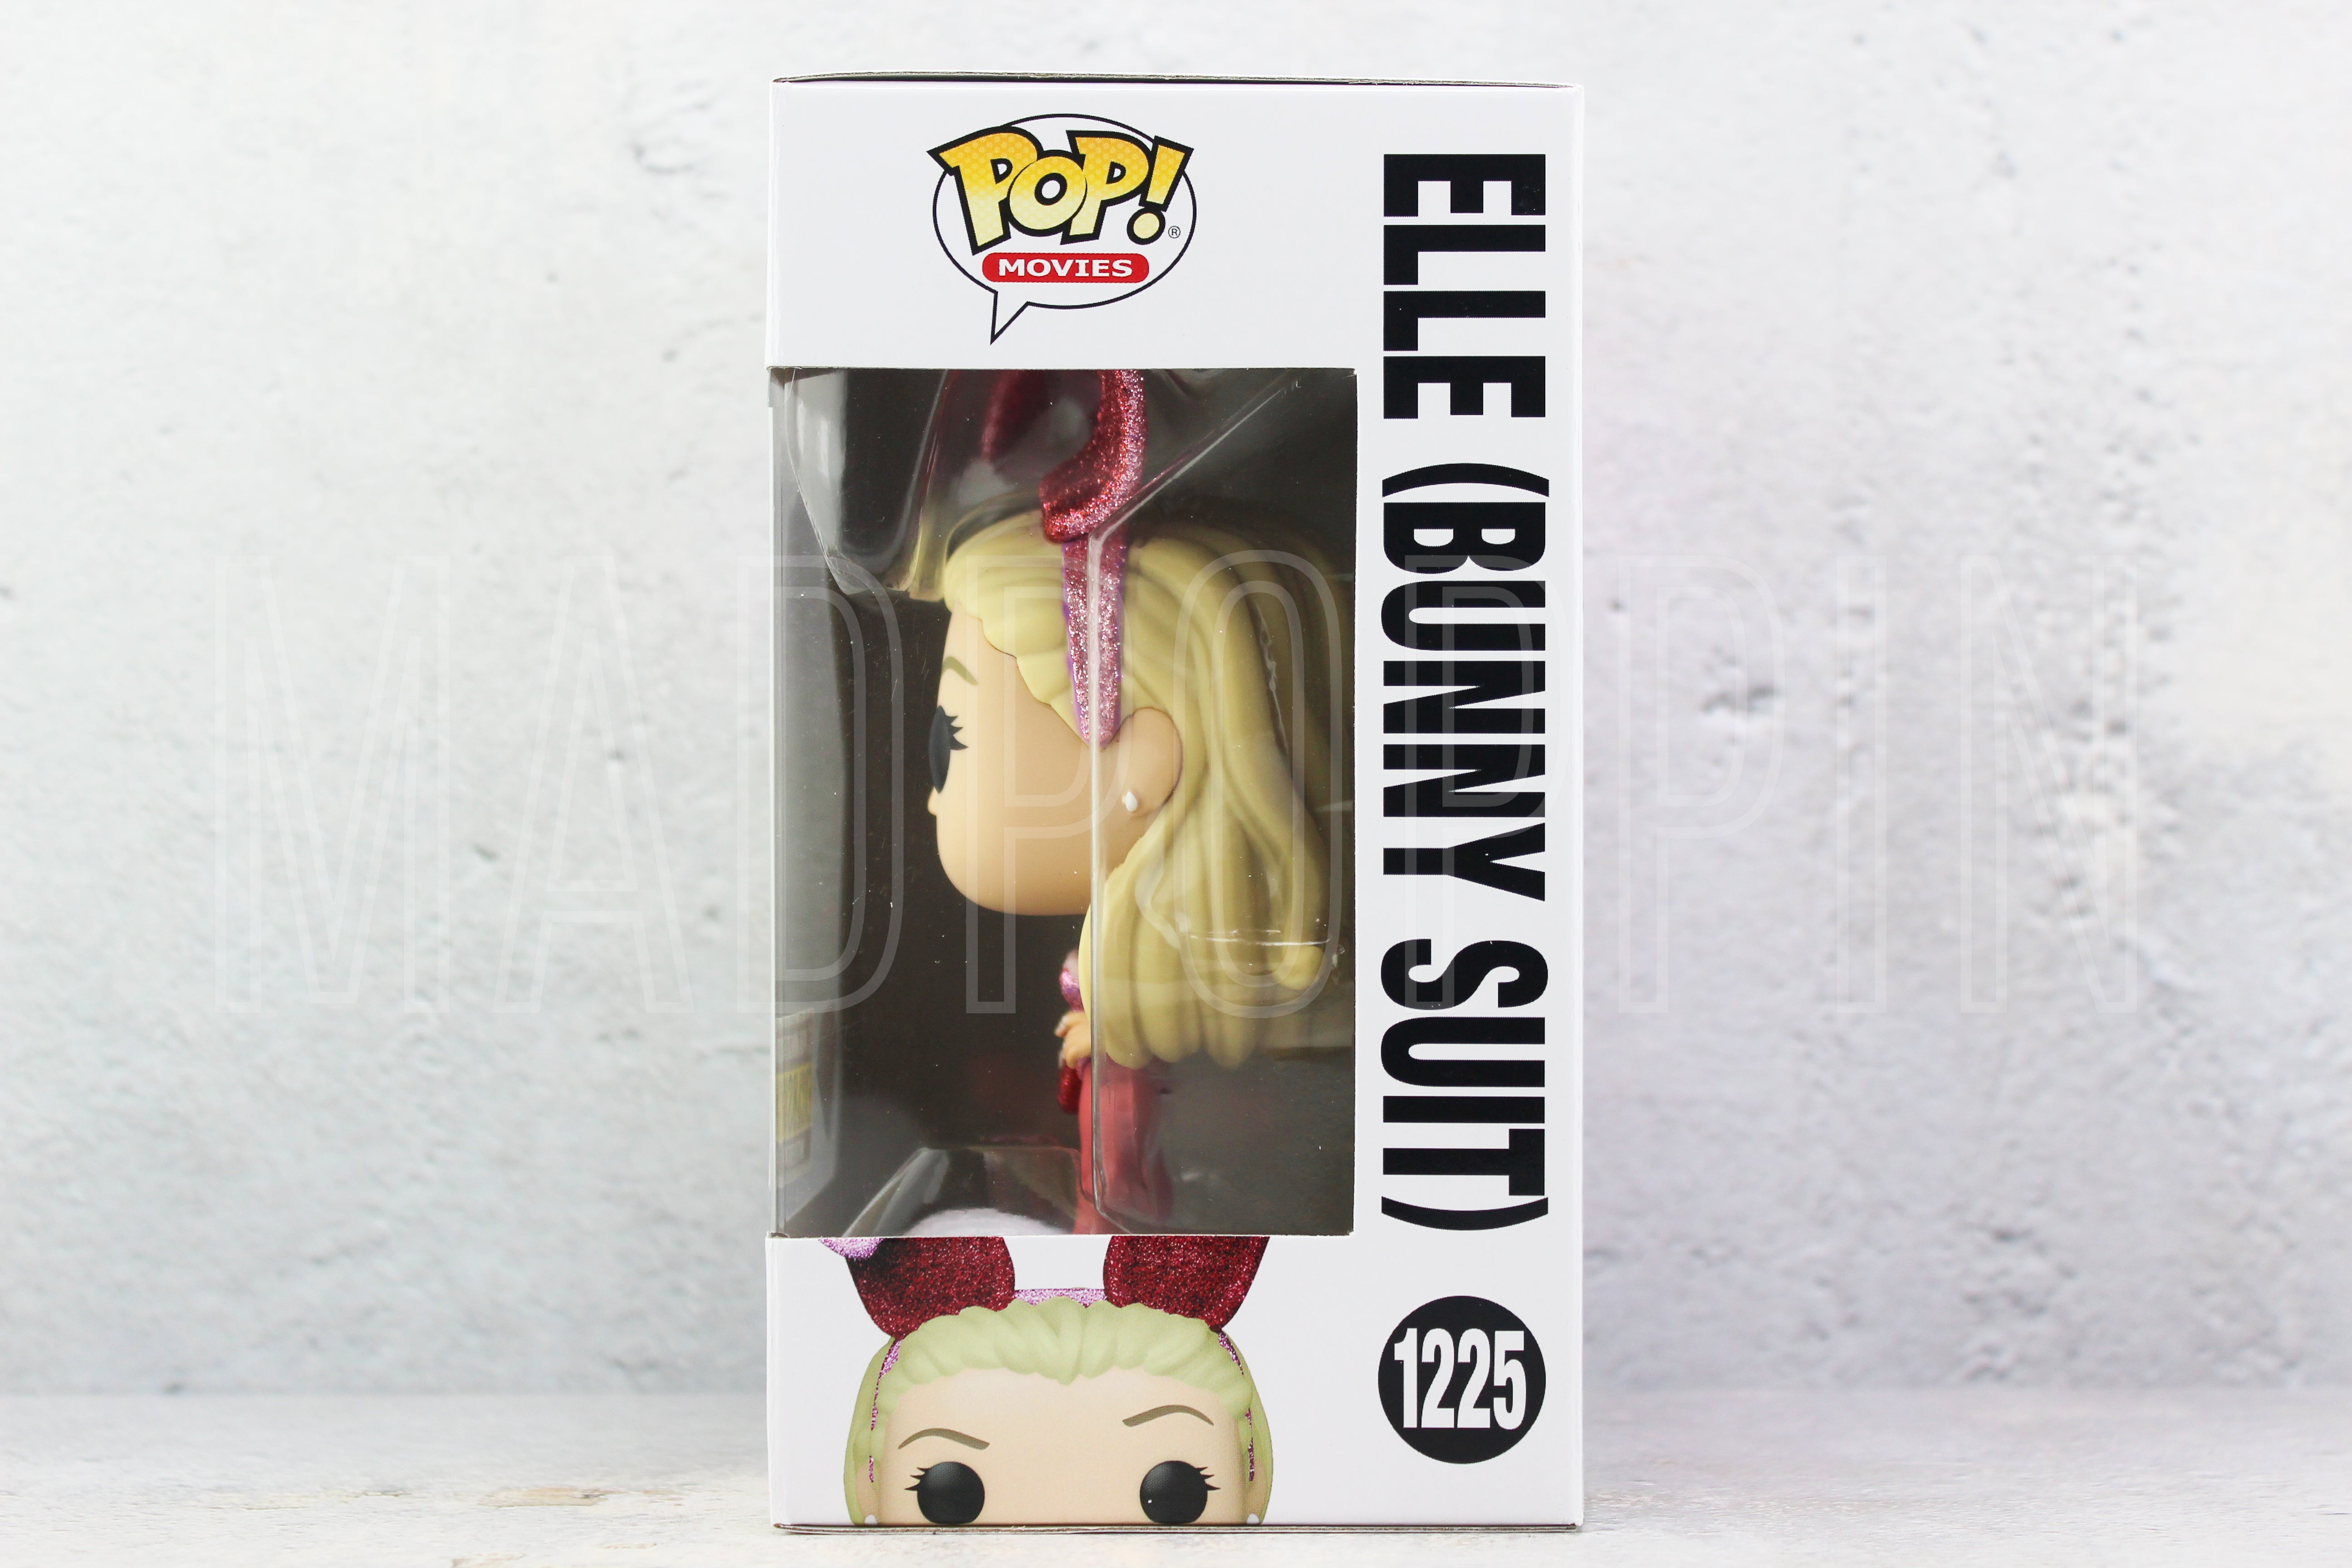 POP! Movies: Legally Blonde - Elle (Bunny Suit) (Diamond Collection)